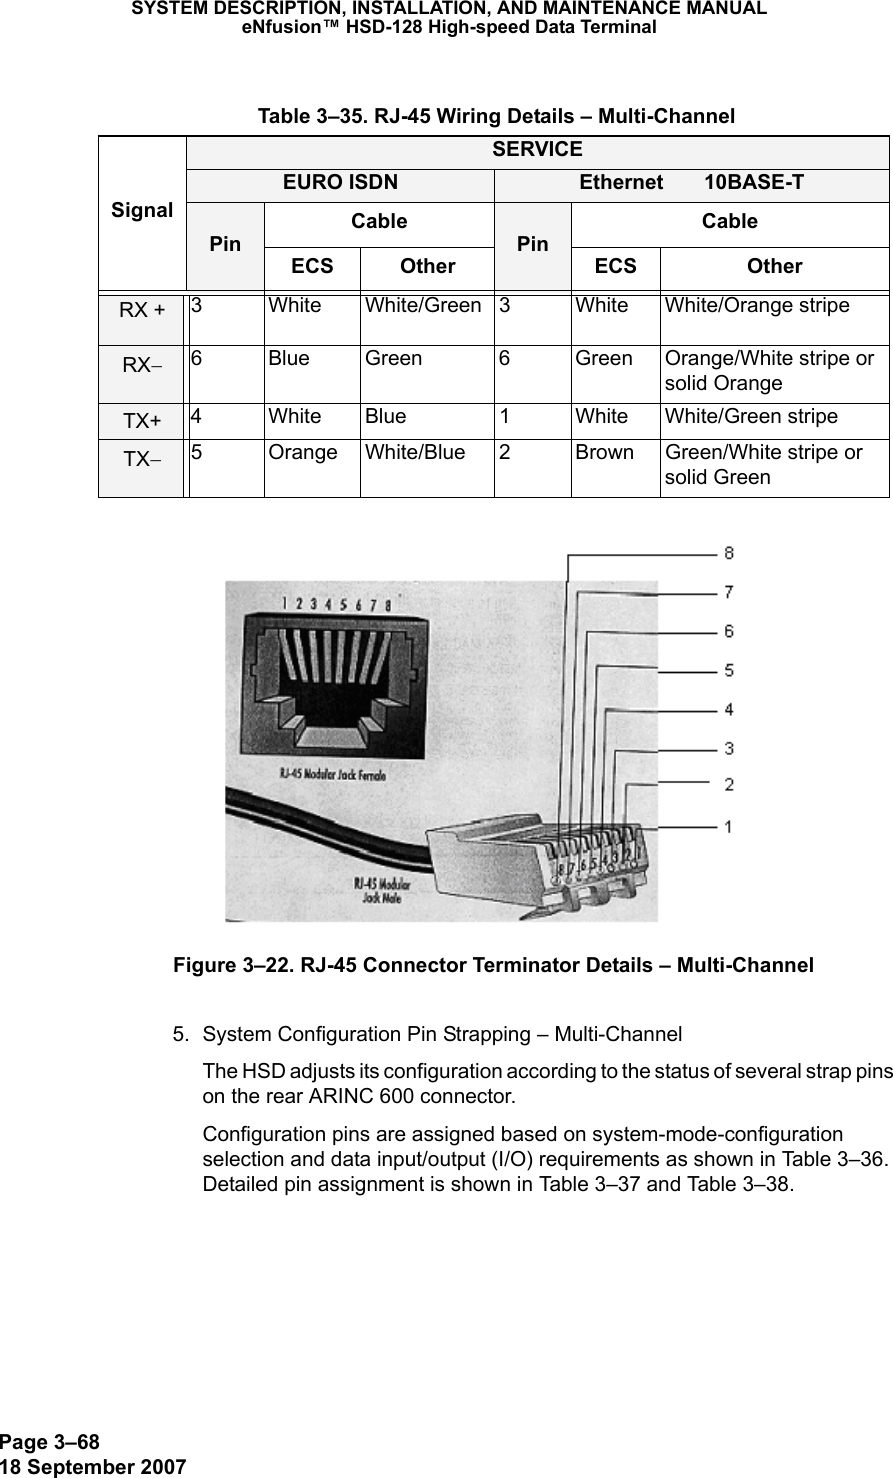 Page 3–6818 September 2007SYSTEM DESCRIPTION, INSTALLATION, AND MAINTENANCE MANUALeNfusion™ HSD-128 High-speed Data TerminalFigure 3–22. RJ-45 Connector Terminator Details – Multi-Channel5. System Configuration Pin Strapping – Multi-ChannelThe HSD adjusts its configuration according to the status of several strap pins on the rear ARINC 600 connector.Configuration pins are assigned based on system-mode-configuration selection and data input/output (I/O) requirements as shown in Table 3–36. Detailed pin assignment is shown in Table 3–37 and Table 3–38. Table 3–35. RJ-45 Wiring Details – Multi-ChannelSignalSERVICEEURO ISDN Ethernet       10BASE-TPinCablePinCableECS Other ECS OtherRX + 3 White White/Green 3 White White/Orange stripeRX−6 Blue Green 6 Green Orange/White stripe or solid OrangeTX+ 4 White Blue 1 White White/Green stripeTX−5 Orange White/Blue 2 Brown Green/White stripe or solid Green